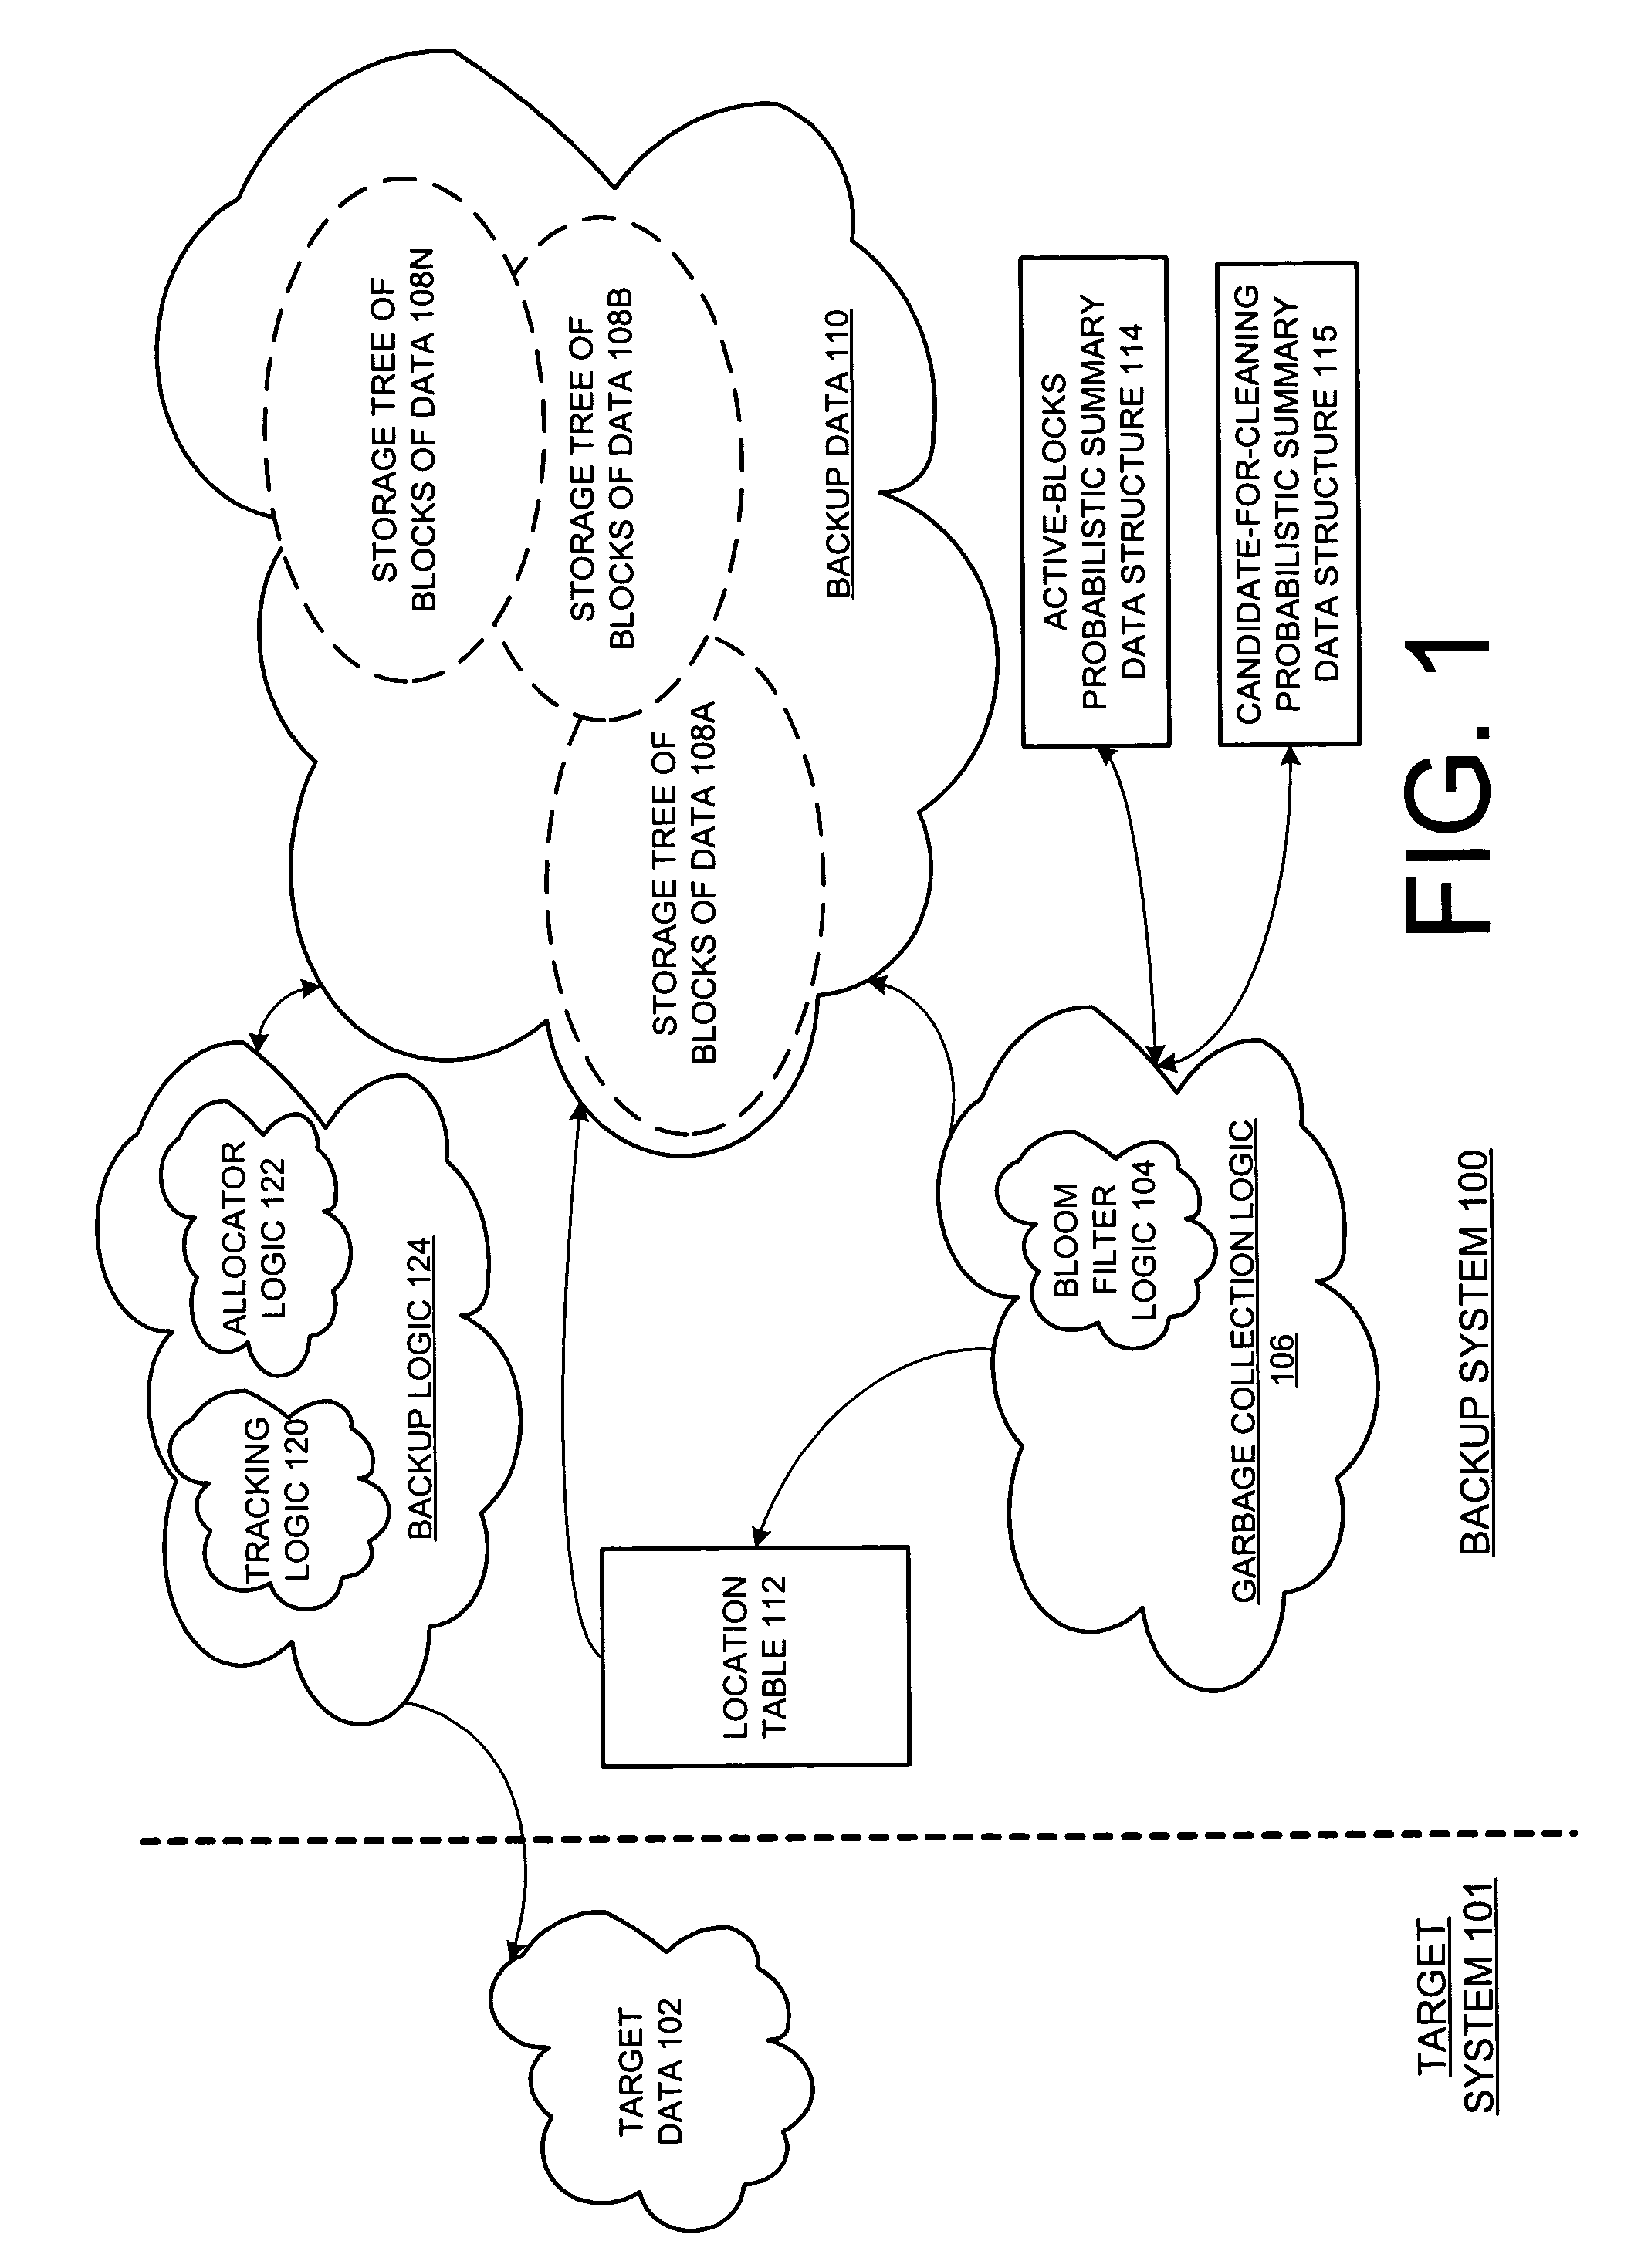 Probabilistic summary data structure based encoding for garbage collection